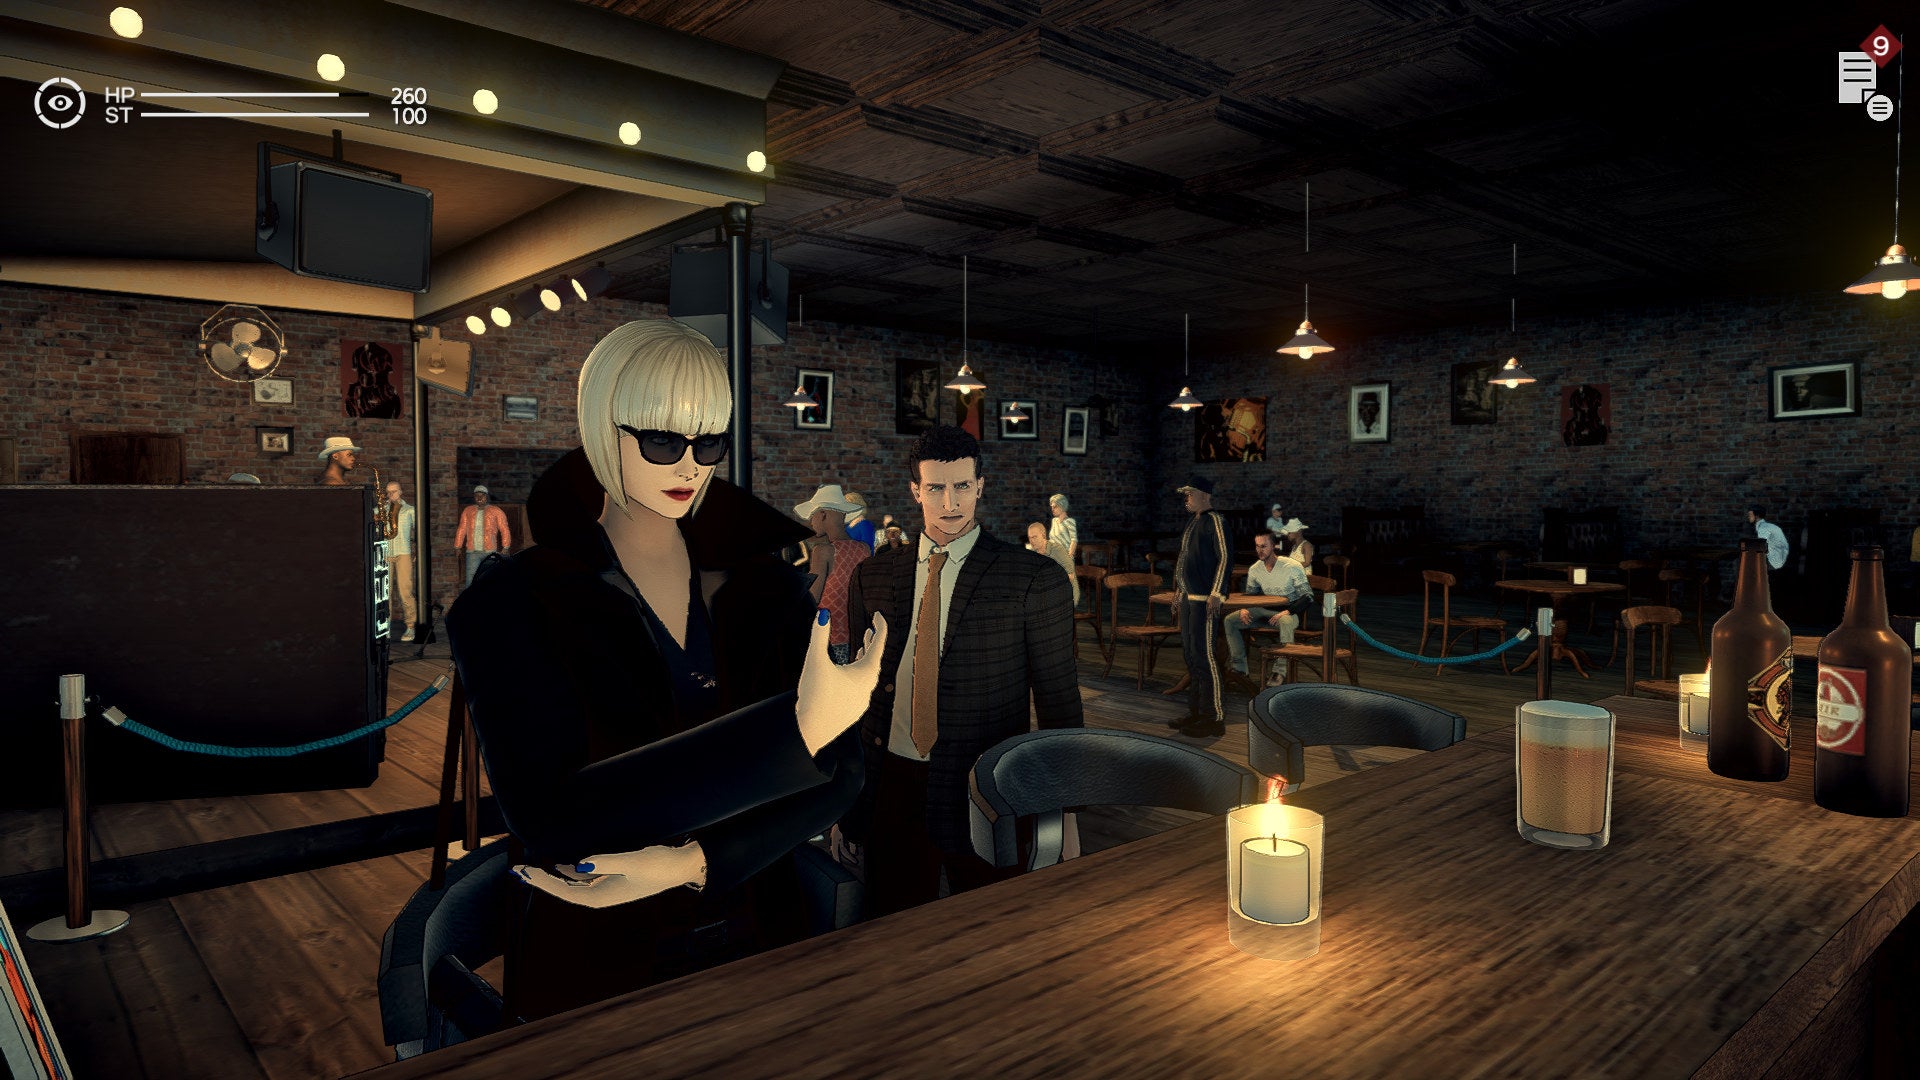 York stands behind Professor R at the bar in a Deadly Premonition 2 screenshot.